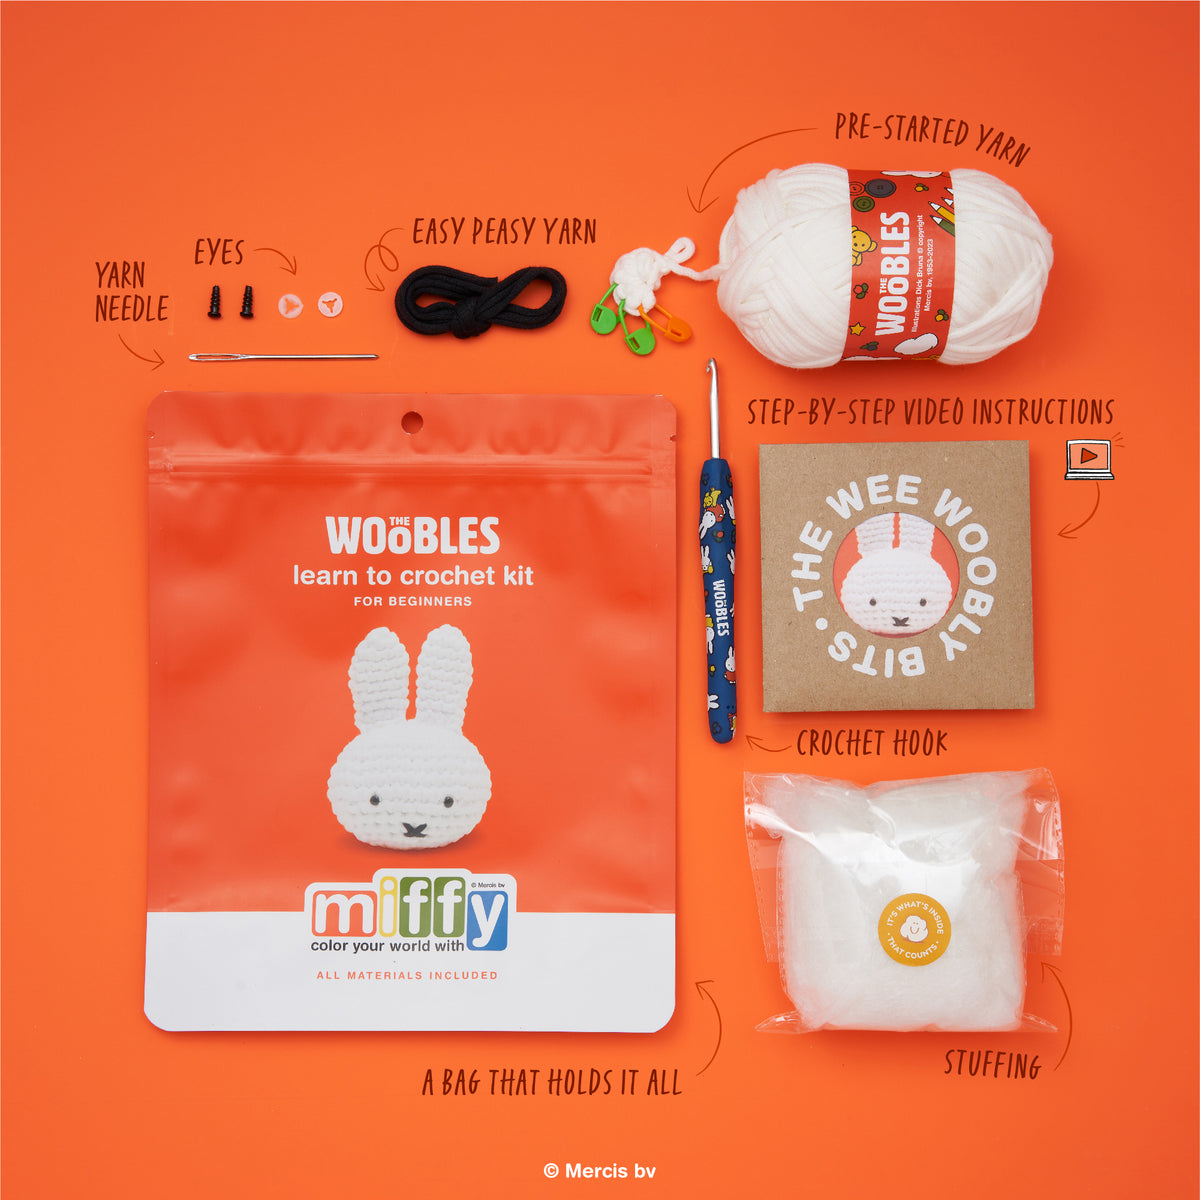 Miffy from the Woobles kit! 🐰 🧶 #crochet #woobles #miffy #woobleskit